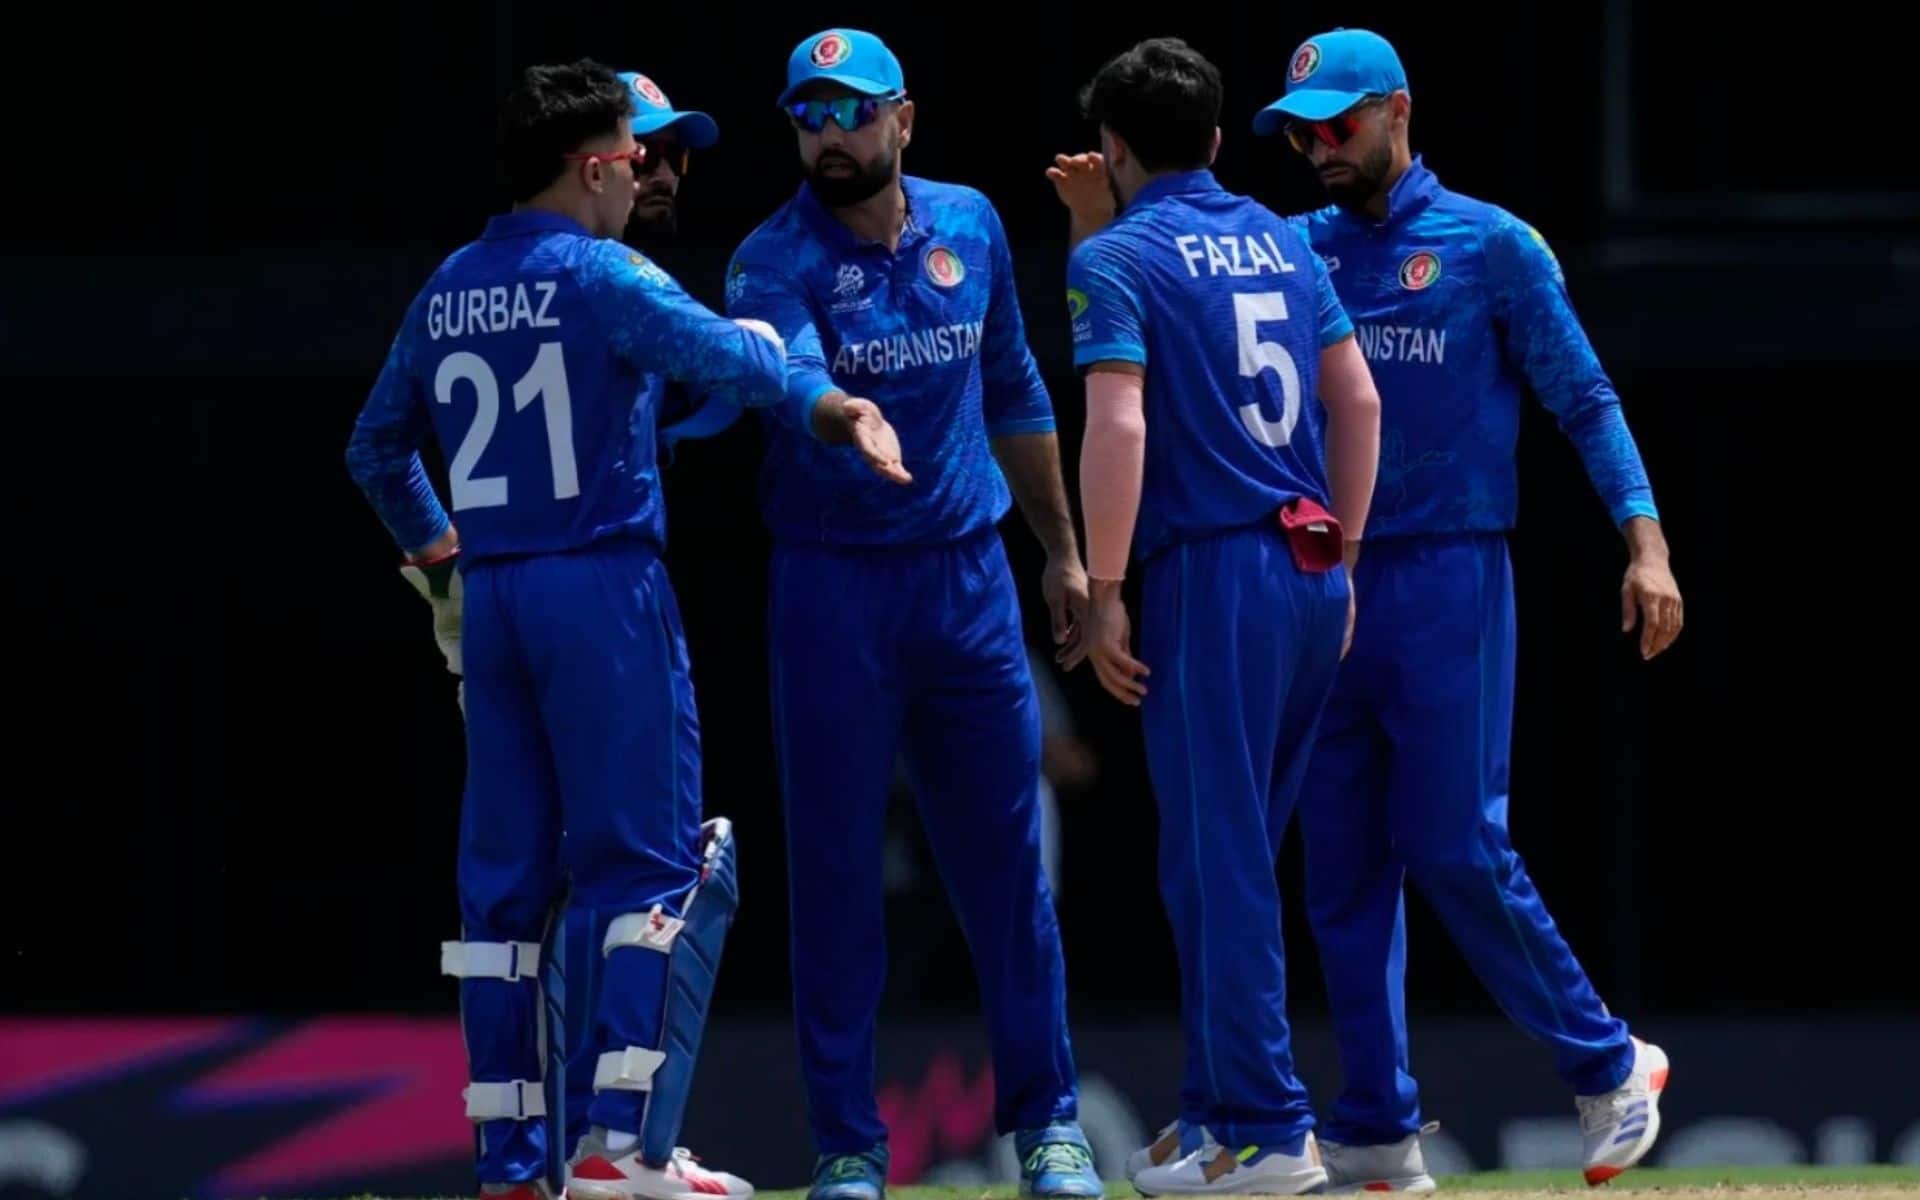 Afghanistan players at the 2024 T20 World Cup (x.com)